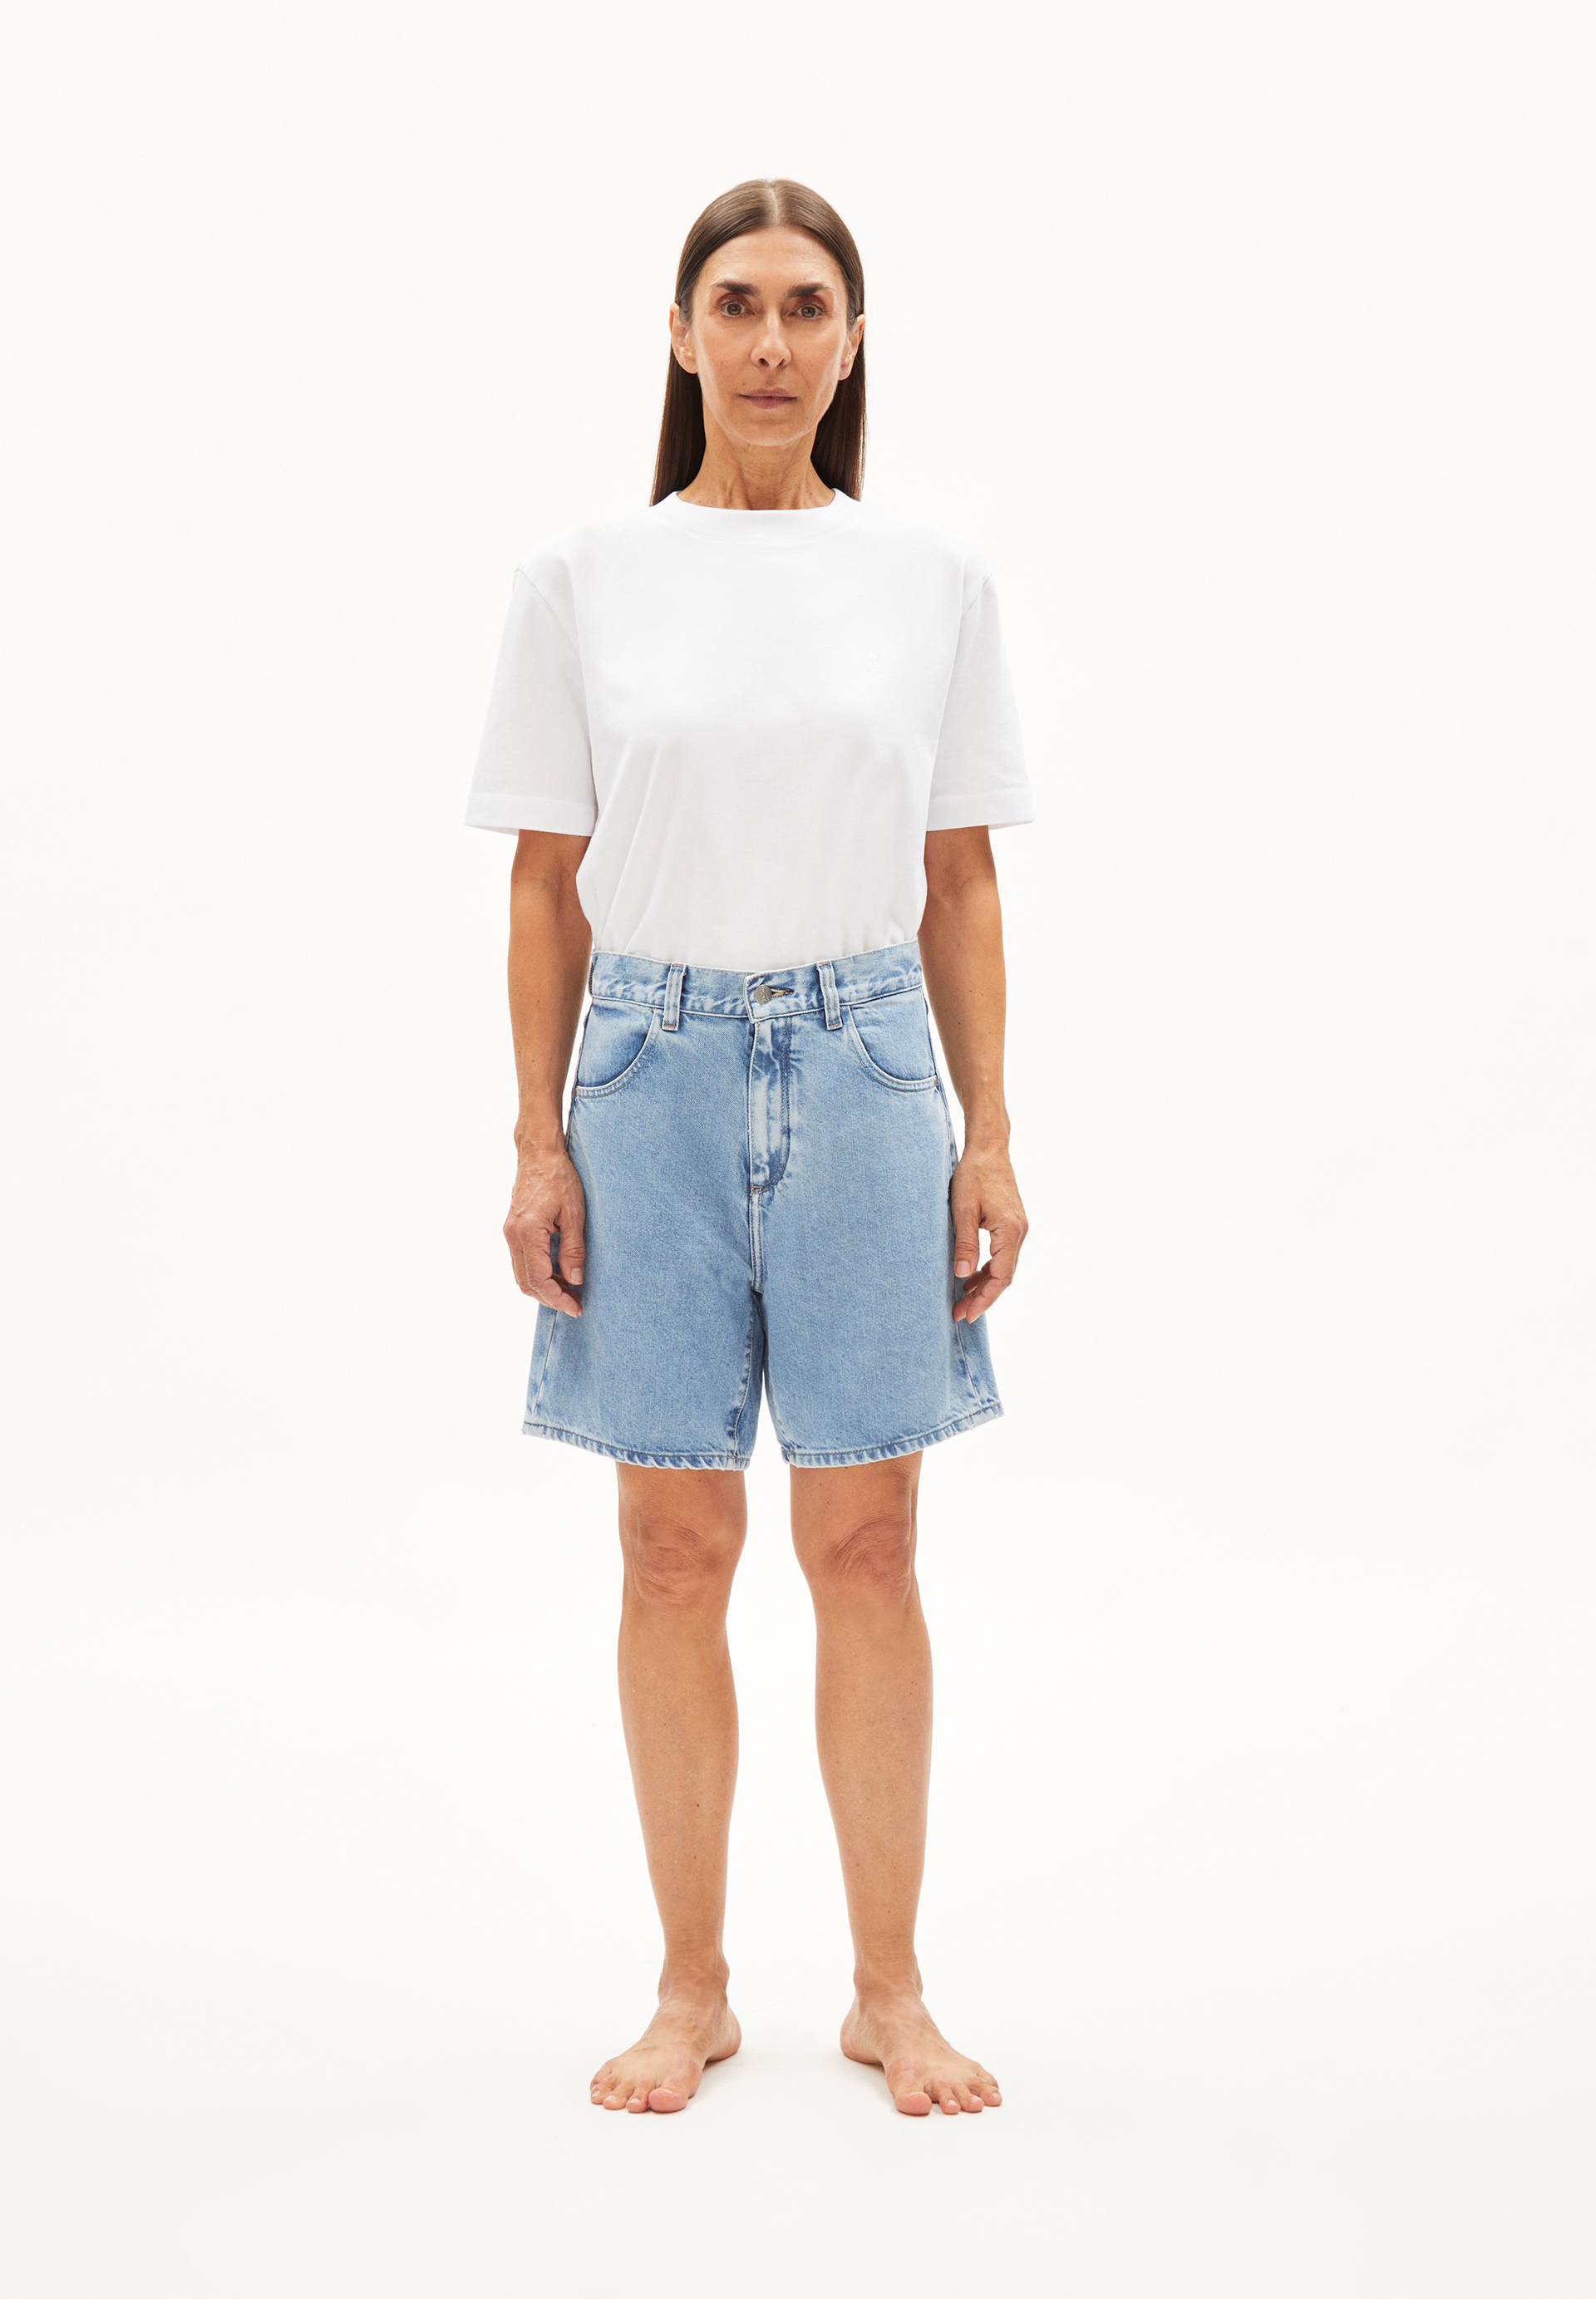 FREYMAA Shorts Regular Fit made of recycled Cotton